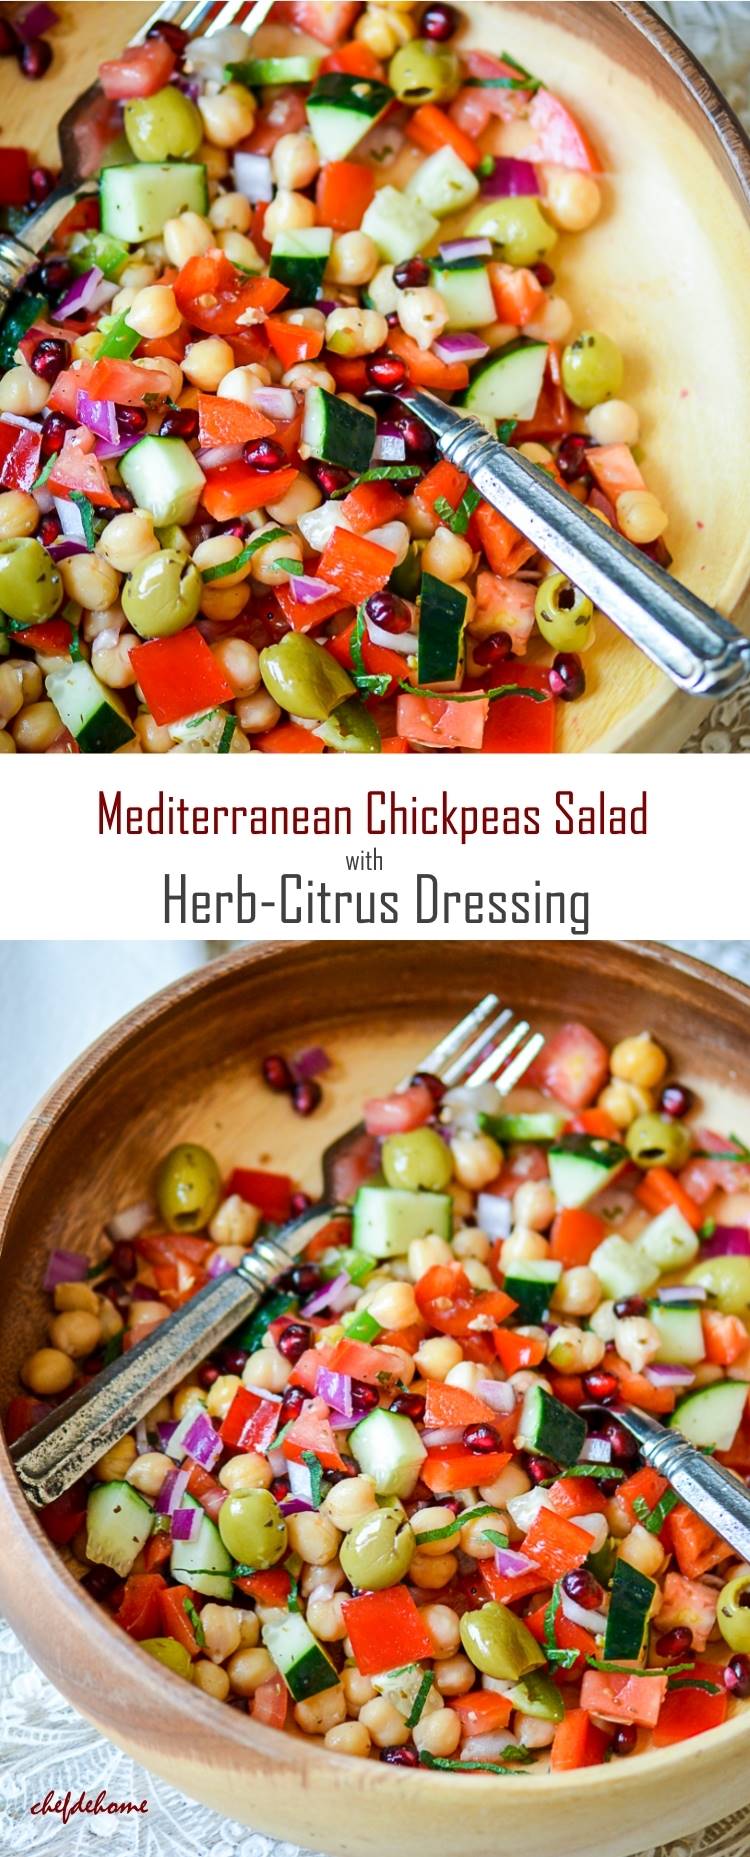 Easy and Healthy 10 Minutes Mediterranean Chickpeas Dinner Salad with Herbs-Citrus Dressing | chefdehome.com